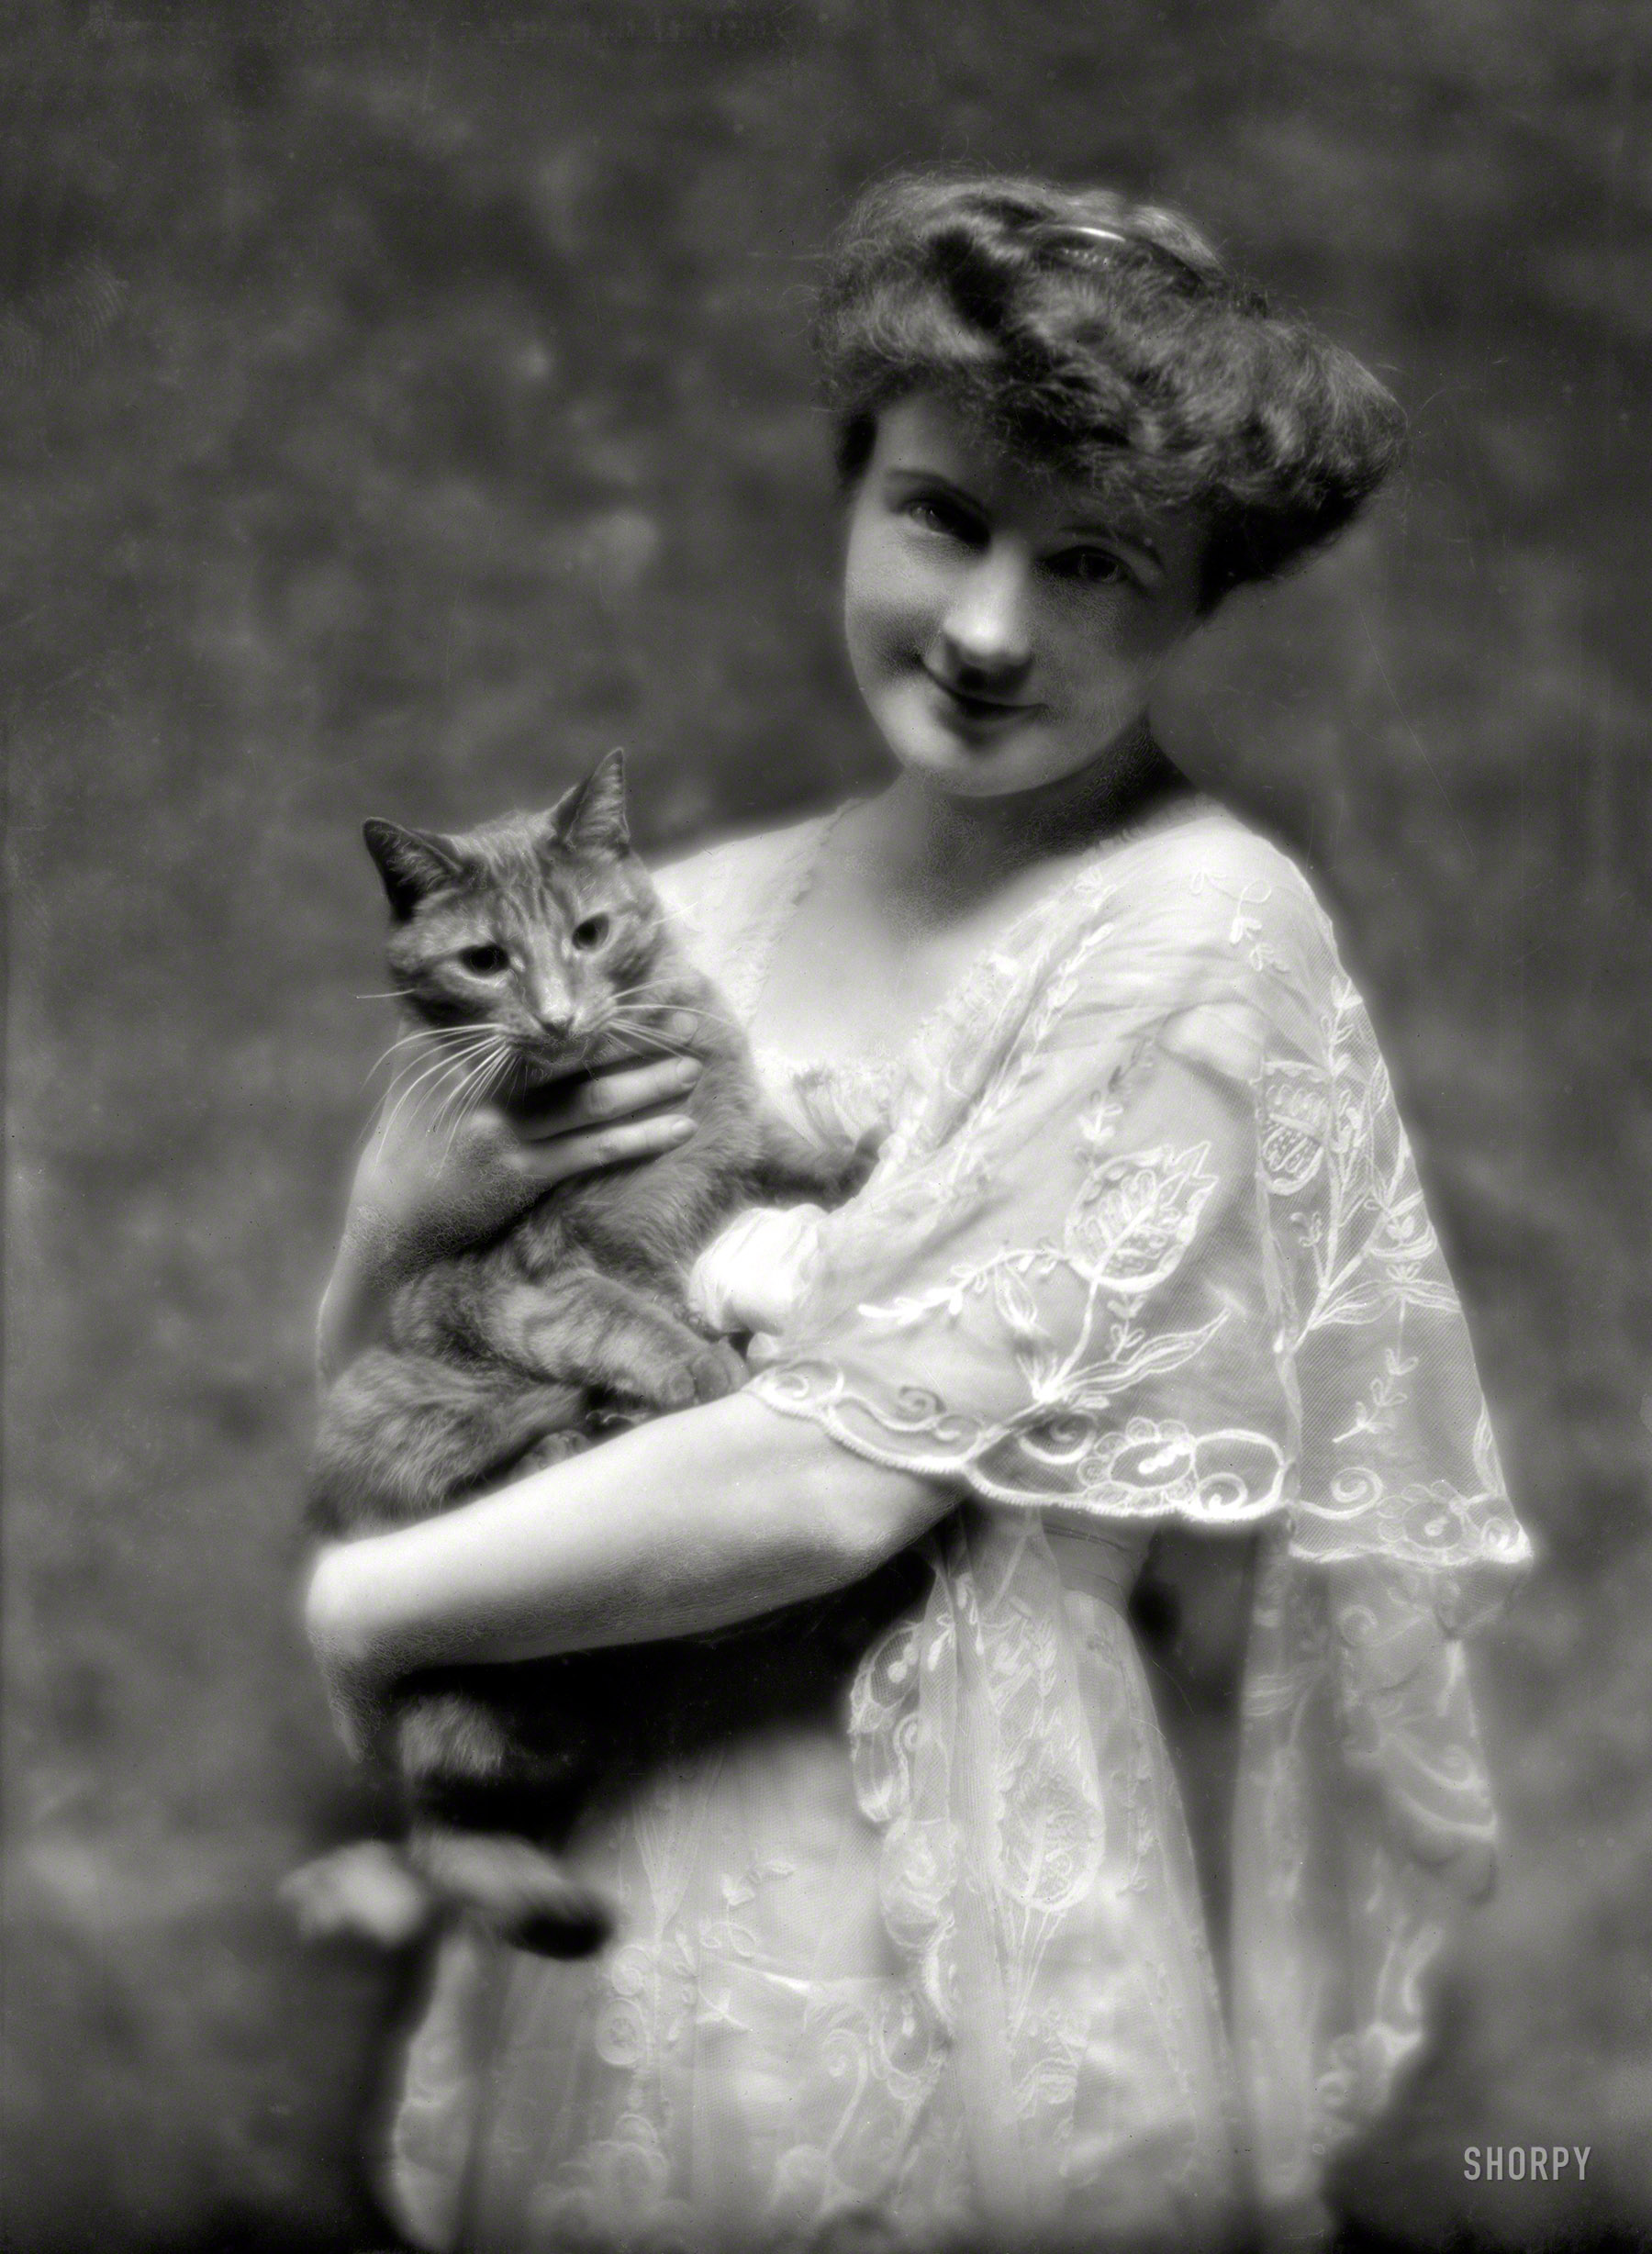 May 12, 1914. "King, G., Miss, with Buzzer the cat. 135 E. 66th Street, New York City." Buzzer served as a prop in dozens of these portraits by Arnold Genthe. 5x7 glass negative, with much curlicue stippling. View full size.